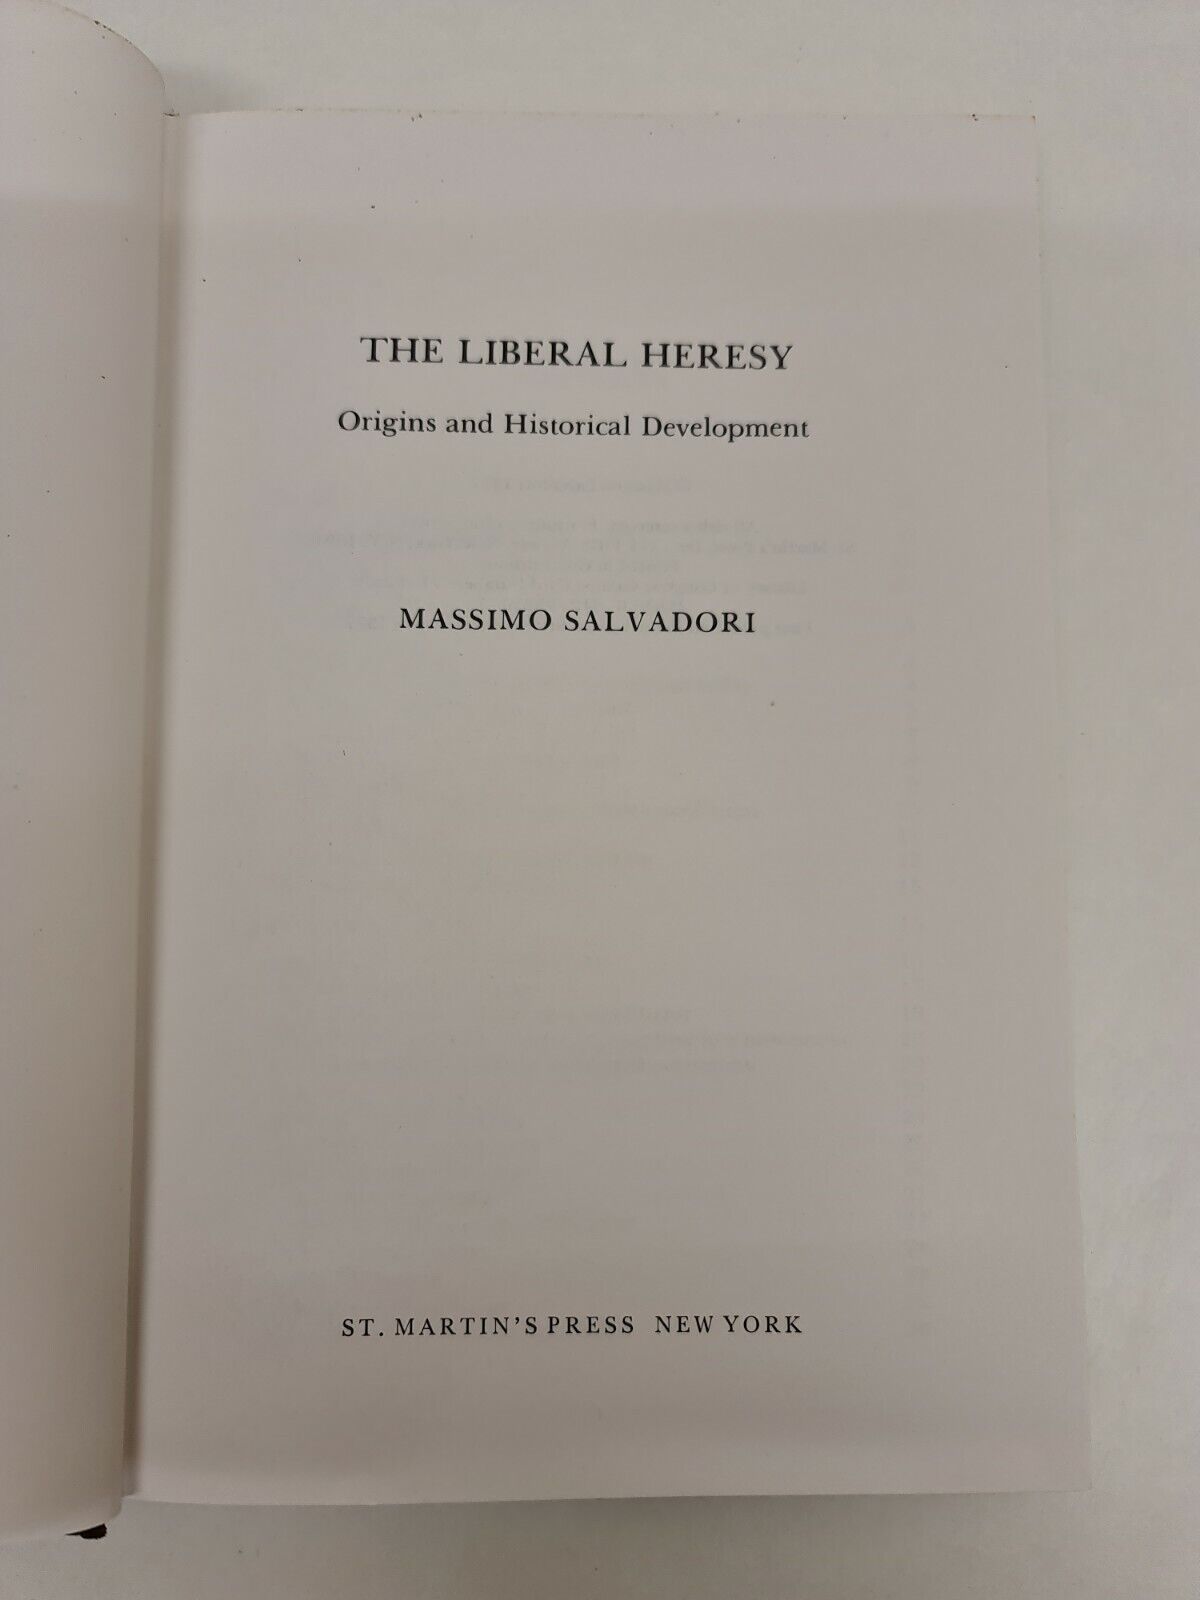 The Liberal Heresy: Origins and Historical Development by M Salvadori (1977)